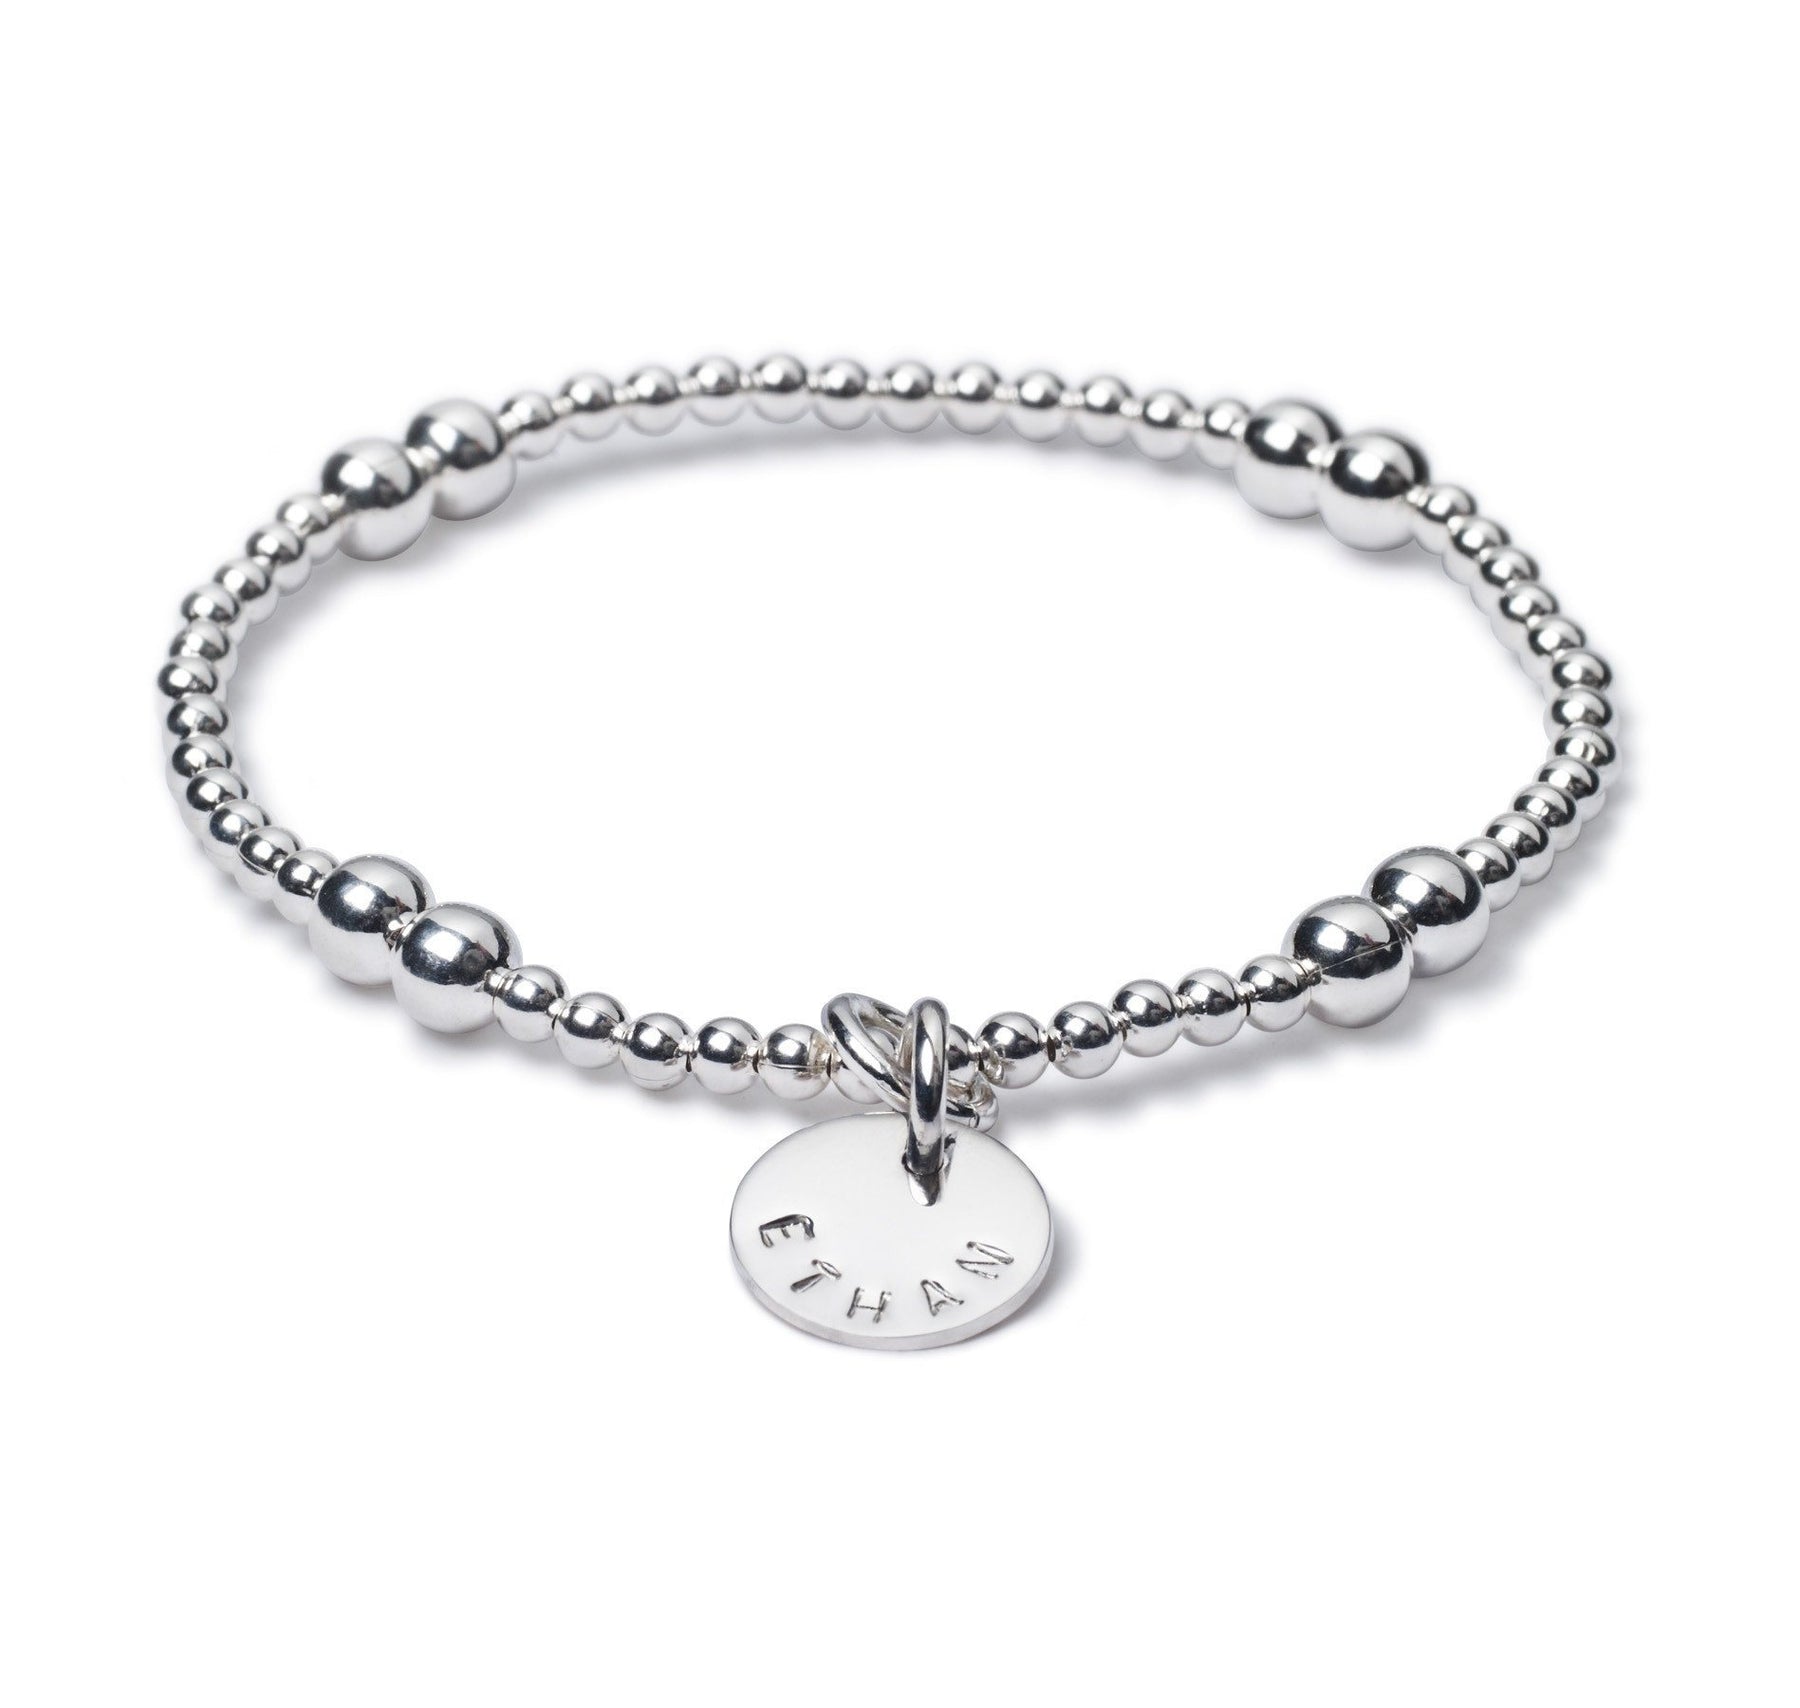 Erin two-Sized Ball Bracelet - Suetables